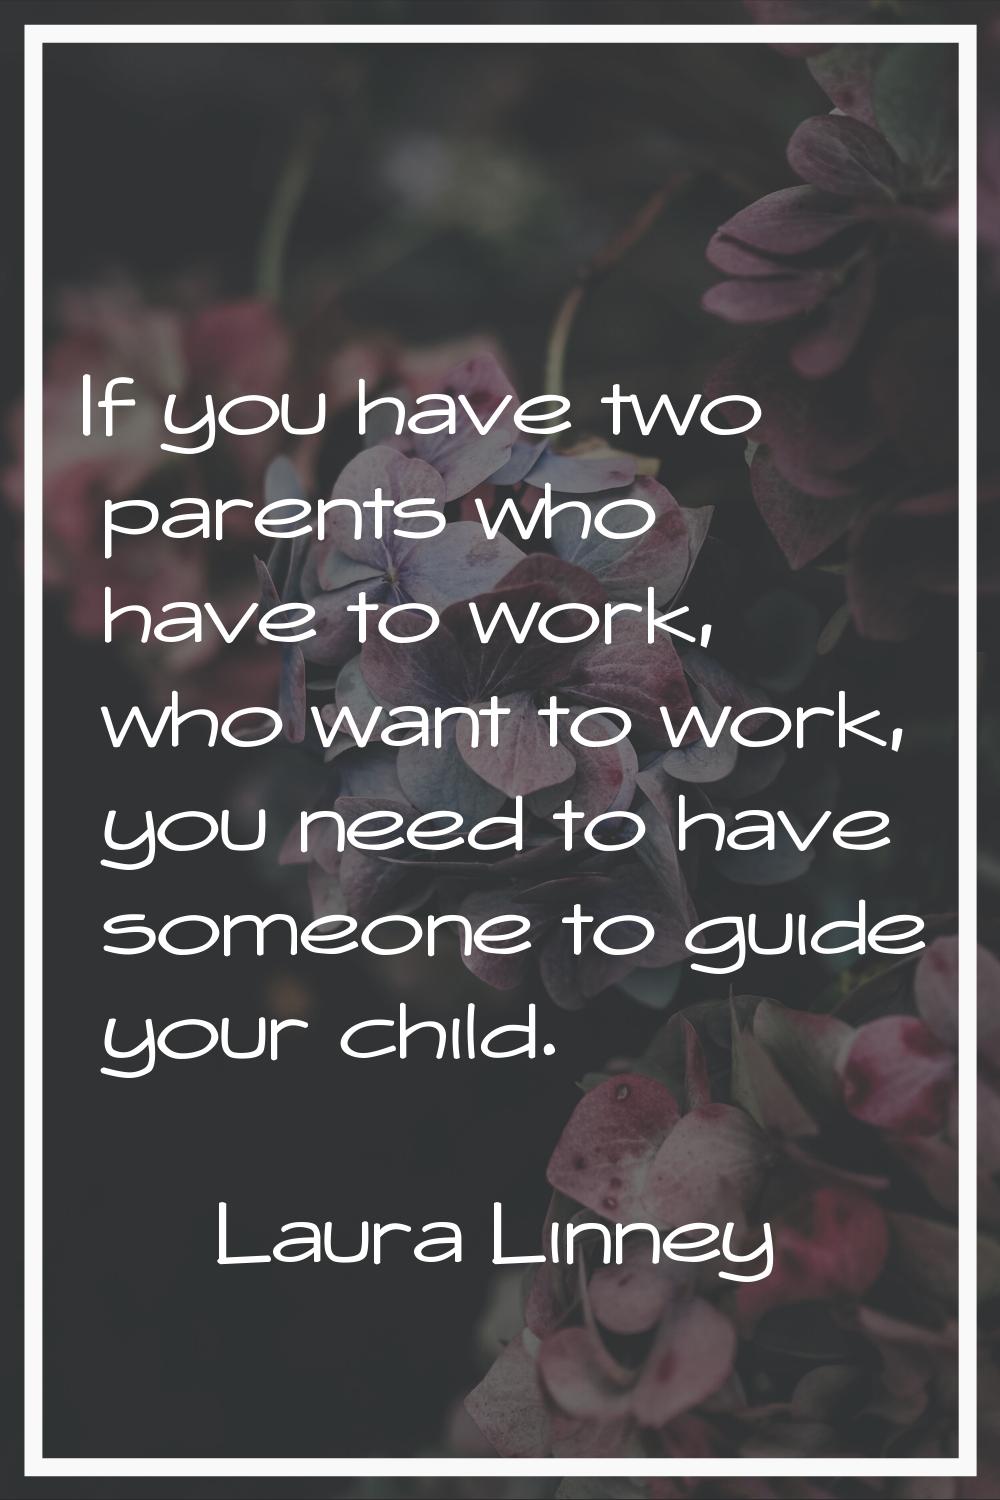 If you have two parents who have to work, who want to work, you need to have someone to guide your 